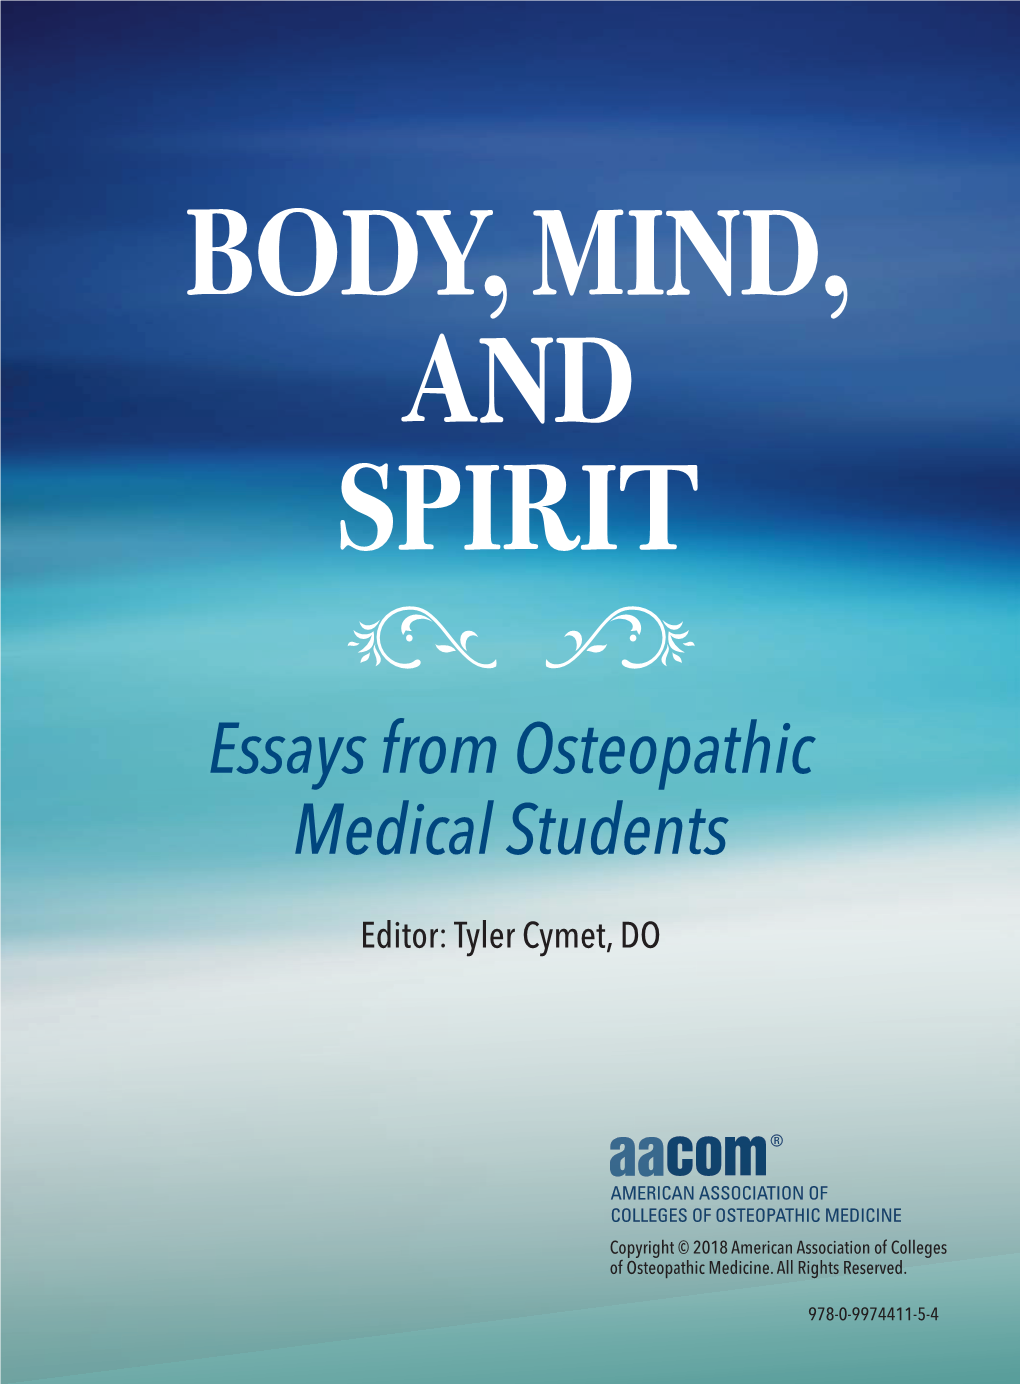 Body, Mind, and Spirit: Essays by Osteopathic Medical